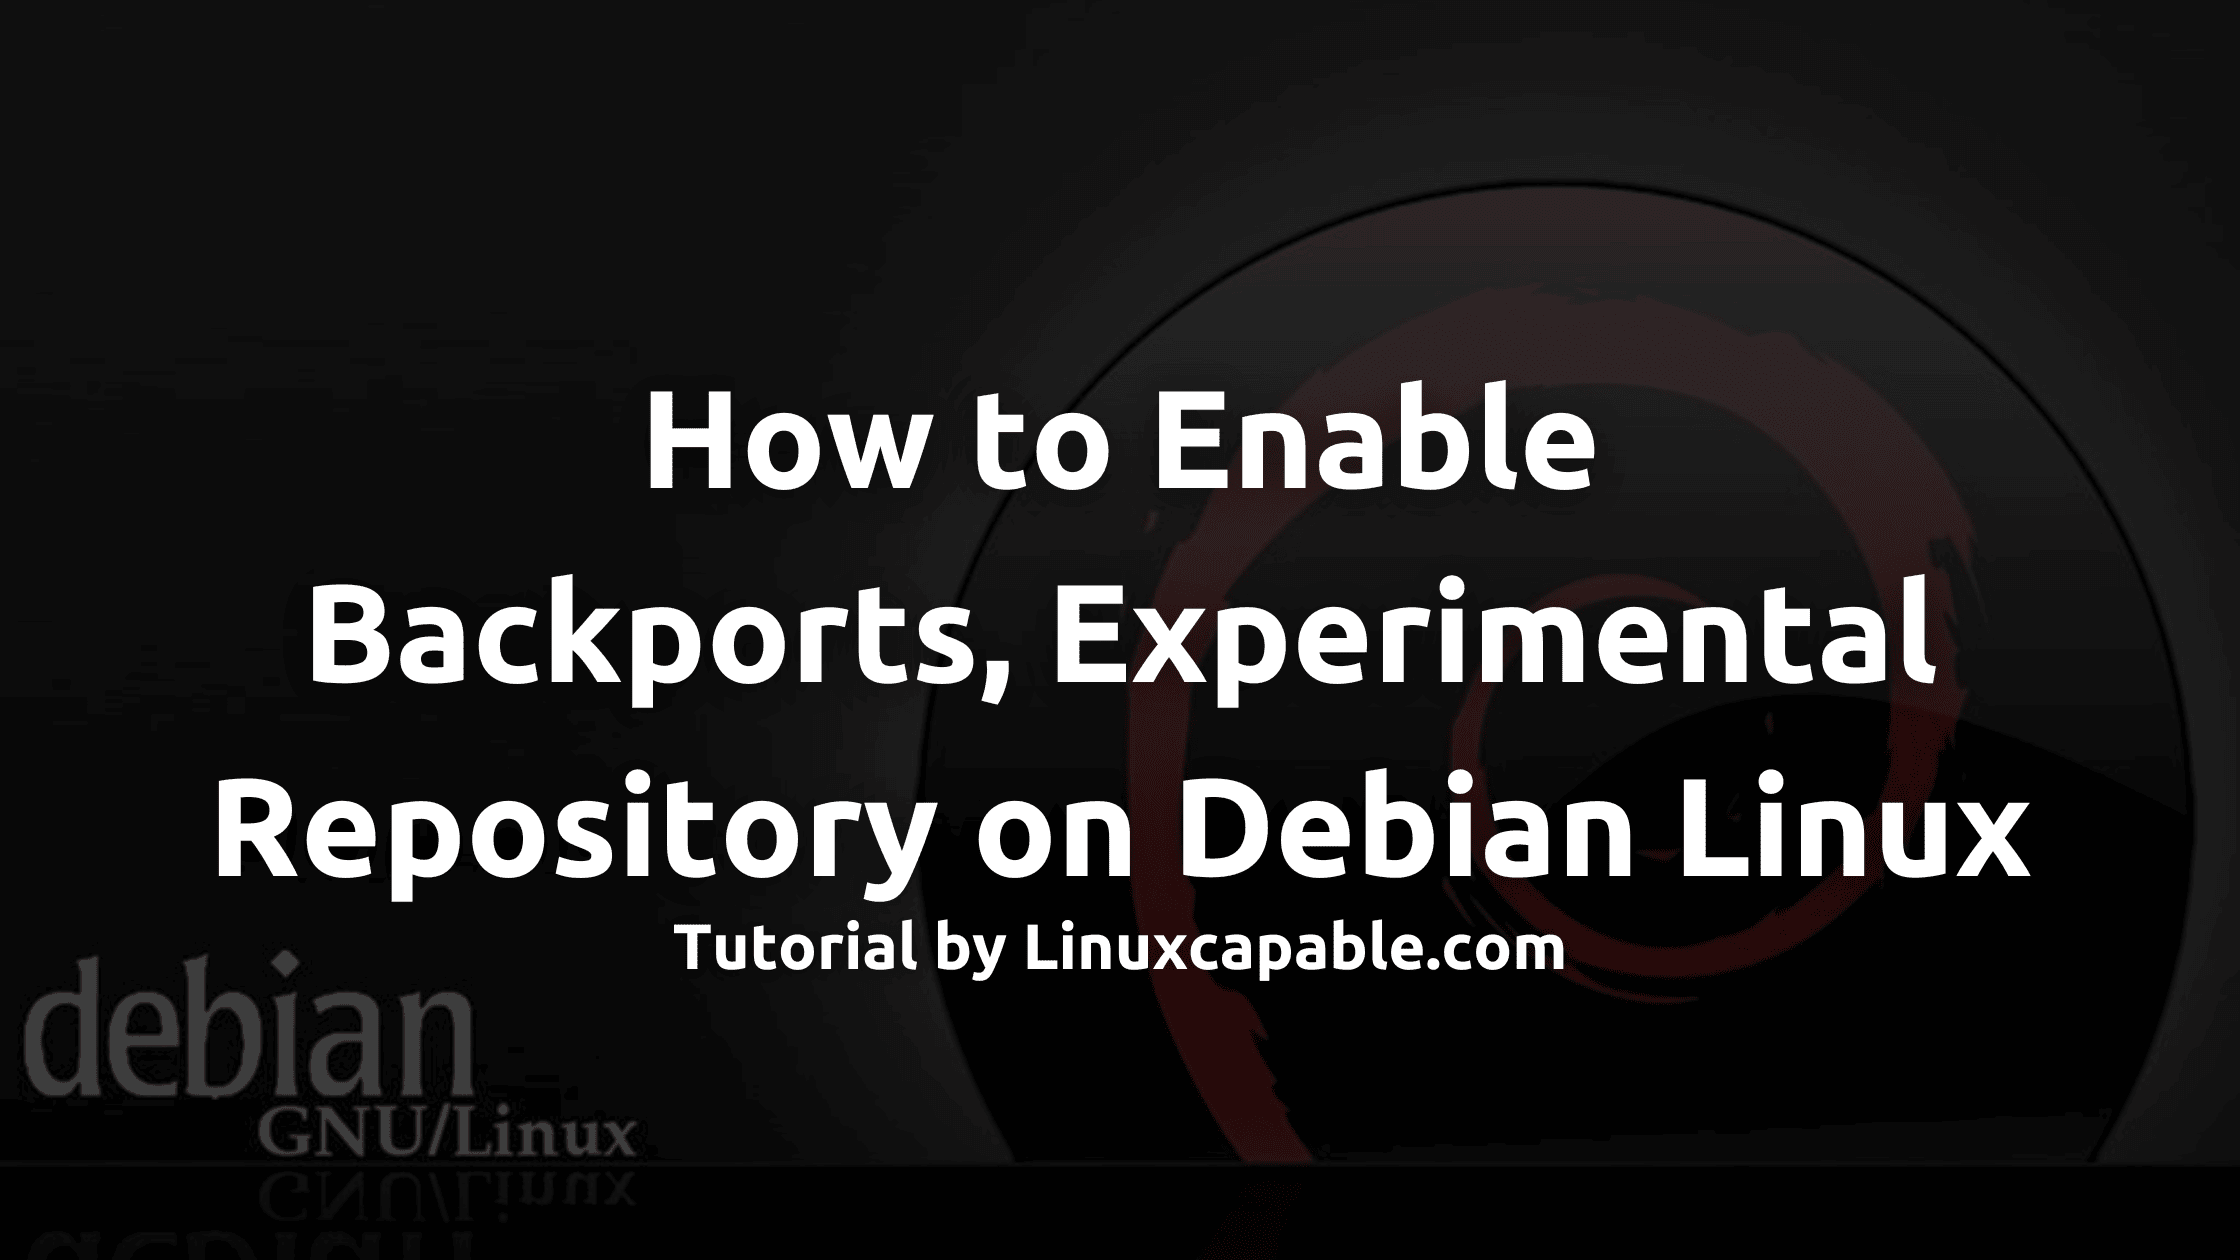 How to Install Backports, Experimental Repository on Debian Linux